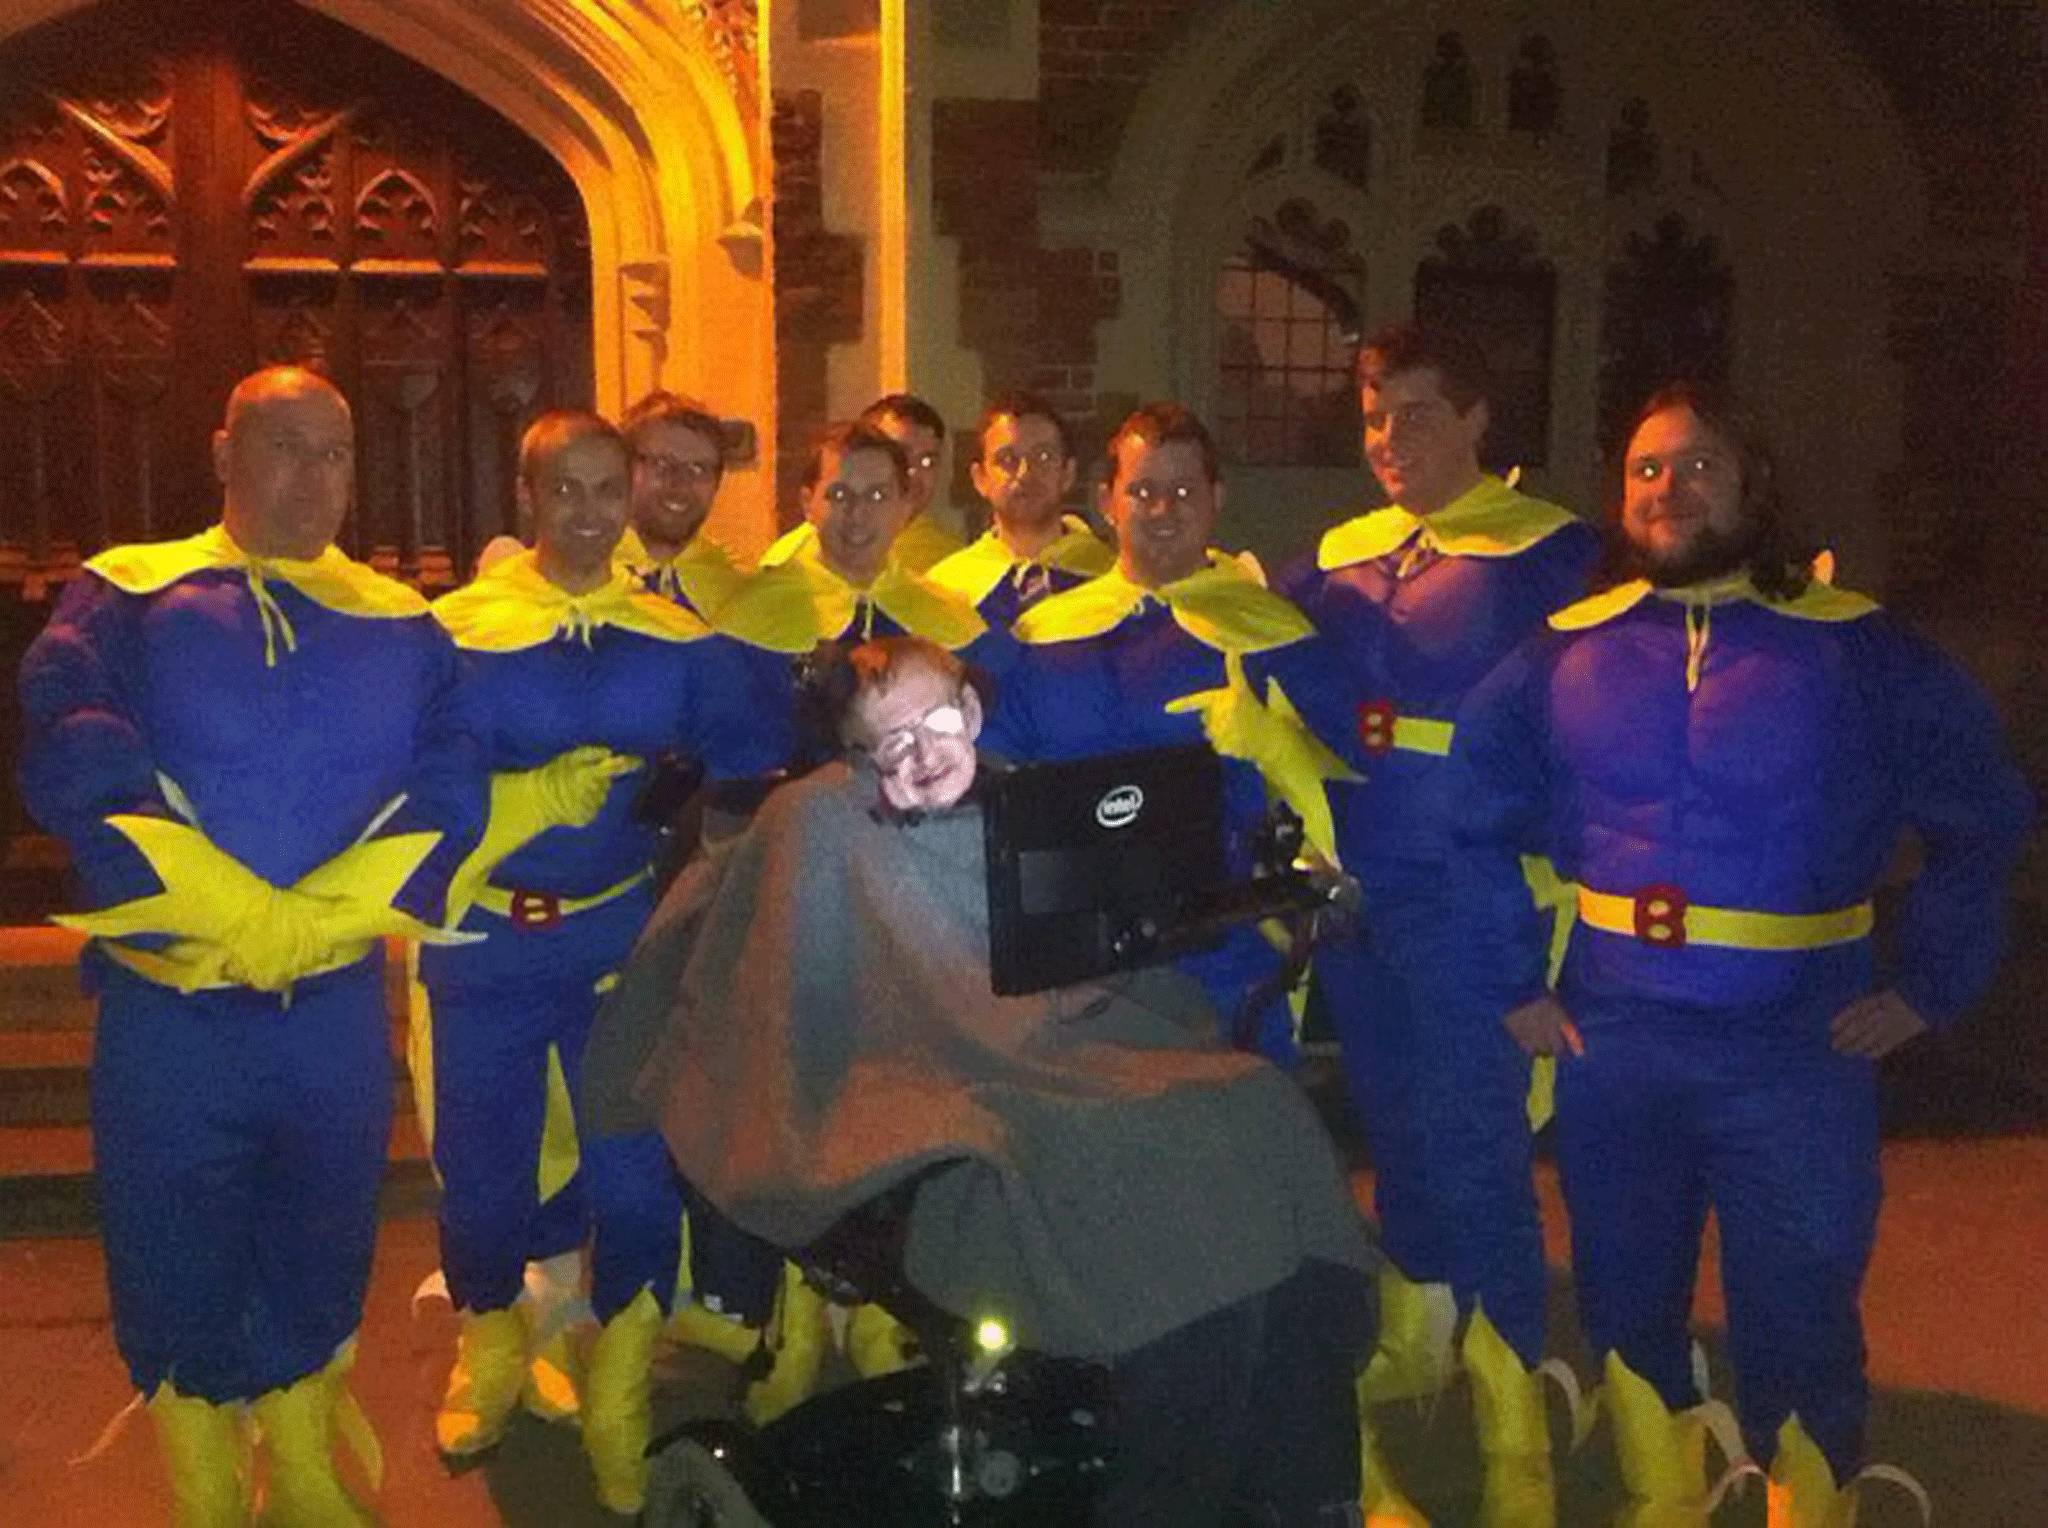 The group posted their photo with Stephen Hawking on Facebook